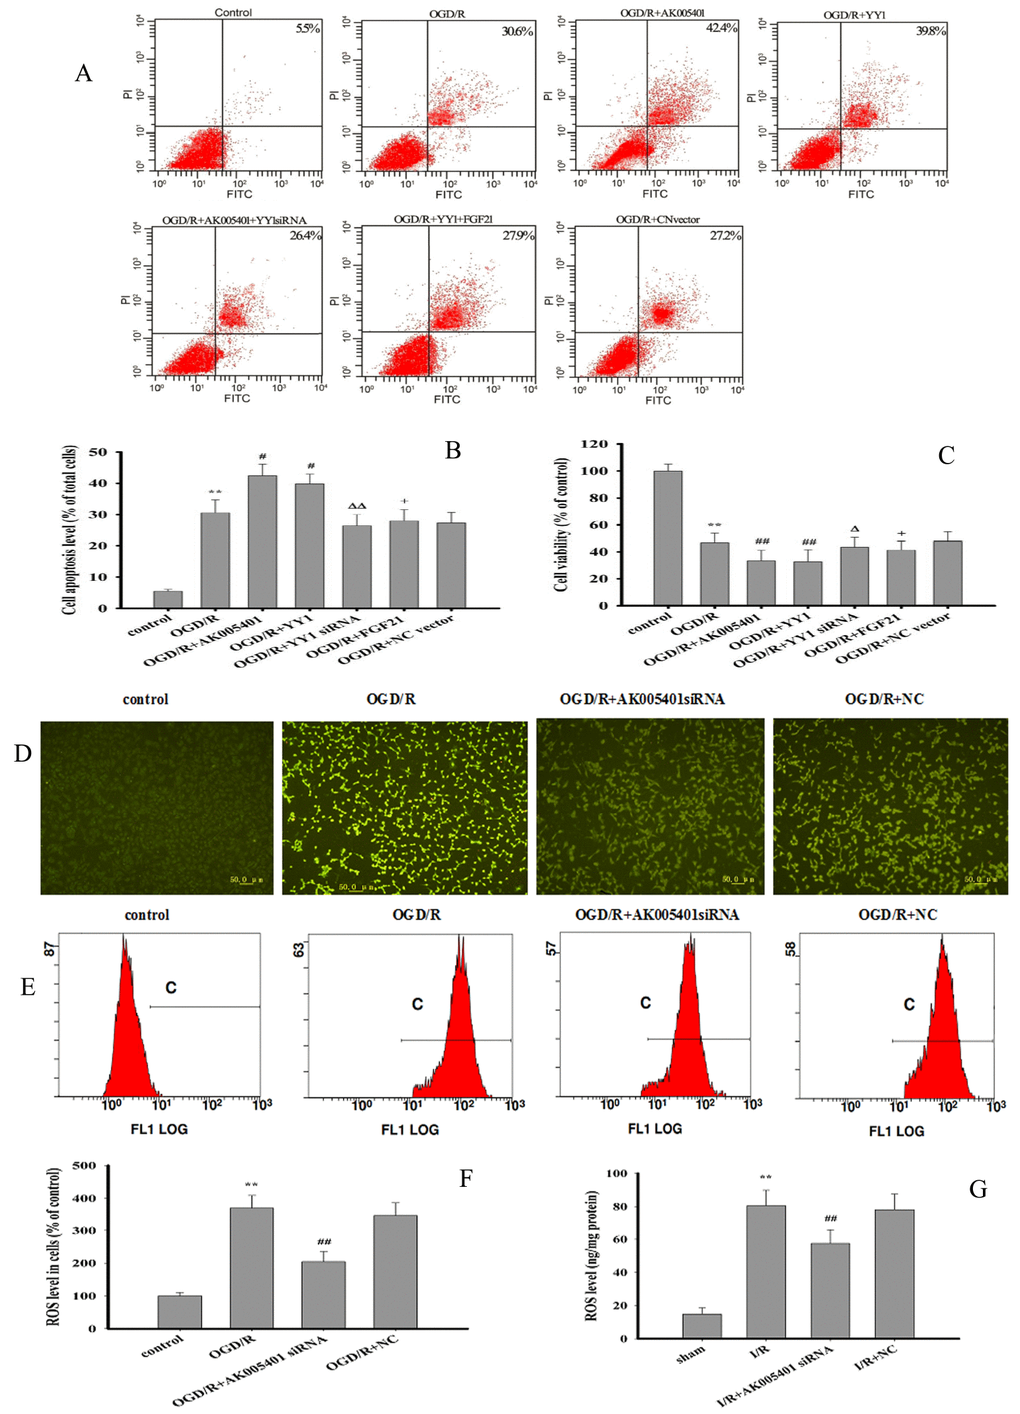 Effect of overexpression of AK005401and YY1 on cell viability and apoptosis and effect of AK005401 on ROS generation. Mice and HT22 cells were used to establish I/R model and OGD/R model, respectively. Cells were collected and seeded in a 96-well plate or 6-well plate and divided into seven groups as follows: control, OGD/R, OGD/R+AK005401 (OGD/R+ AK005401 overexpression vector), OGD/R+YY1 siRNA (OGD/R + AK005401 overexpression vector +YY1 siRNA), OGD/R+YY1 (OGD/R+ YY1 overexpression vector), OGD/R+FGF21 (OGD/R + YY1 overexpression vector +FGF21 overexpression vector) and OGD/R+NC vector(OGD/R+ negative control vector) groups. (A) Cell activities were evaluated using AnnexinV/PI apoptosis assay kit. (B) Apoptotic cells obtained from AnnexinV/PI method were counted as a percentage of the total number of cells. (C) Cell viability was detected by MTT method. ROS levels in all groups were detected using fluorescent microscope and flow cytometry. (D) ROS levels were observed using fluorescent microscope after treatment with DCFH-DA. (E) ROS production was analyzed by applying flow cytometry. (F) Effects of AK005401 on ROS levels in HT22 cells (n = 3 experiments). (G) the ROS contents in hippocampus tissues were measured at 450 nm according to the procedures described by ROS ELISA assay kits. Data were presented as mean±SD (n = 10 in hippocampus tissues, or n = 3 in cells). One-way ANOVA test was used to determine statistical significance. **P 